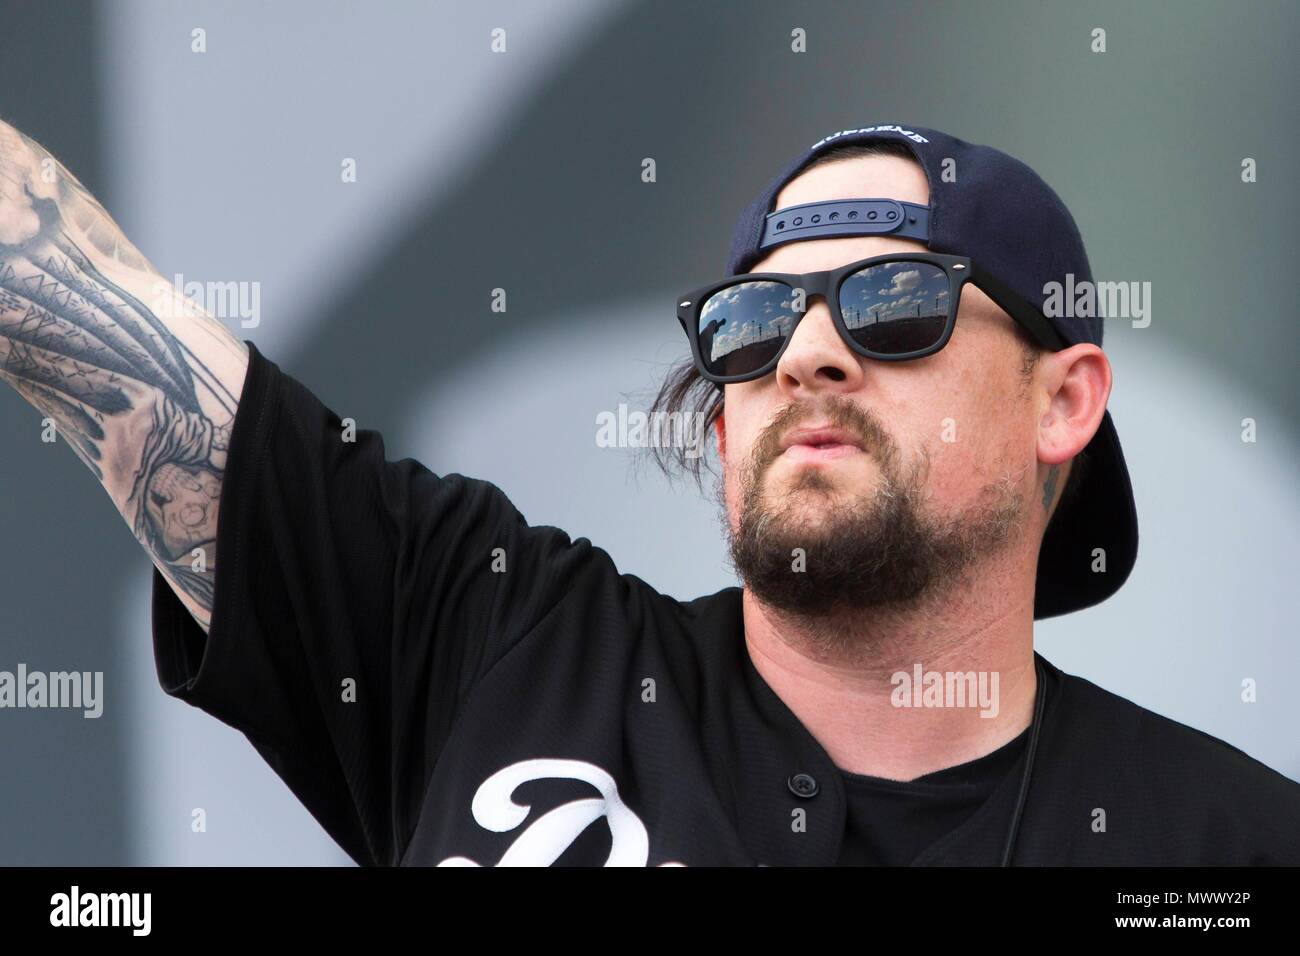 Joel Madden of Good Charlotte performs live on the first day of annual rock festival Rock im Park in Nuremberg, Germany, on 01 June, 2018. | usage worldwide Stock Photo